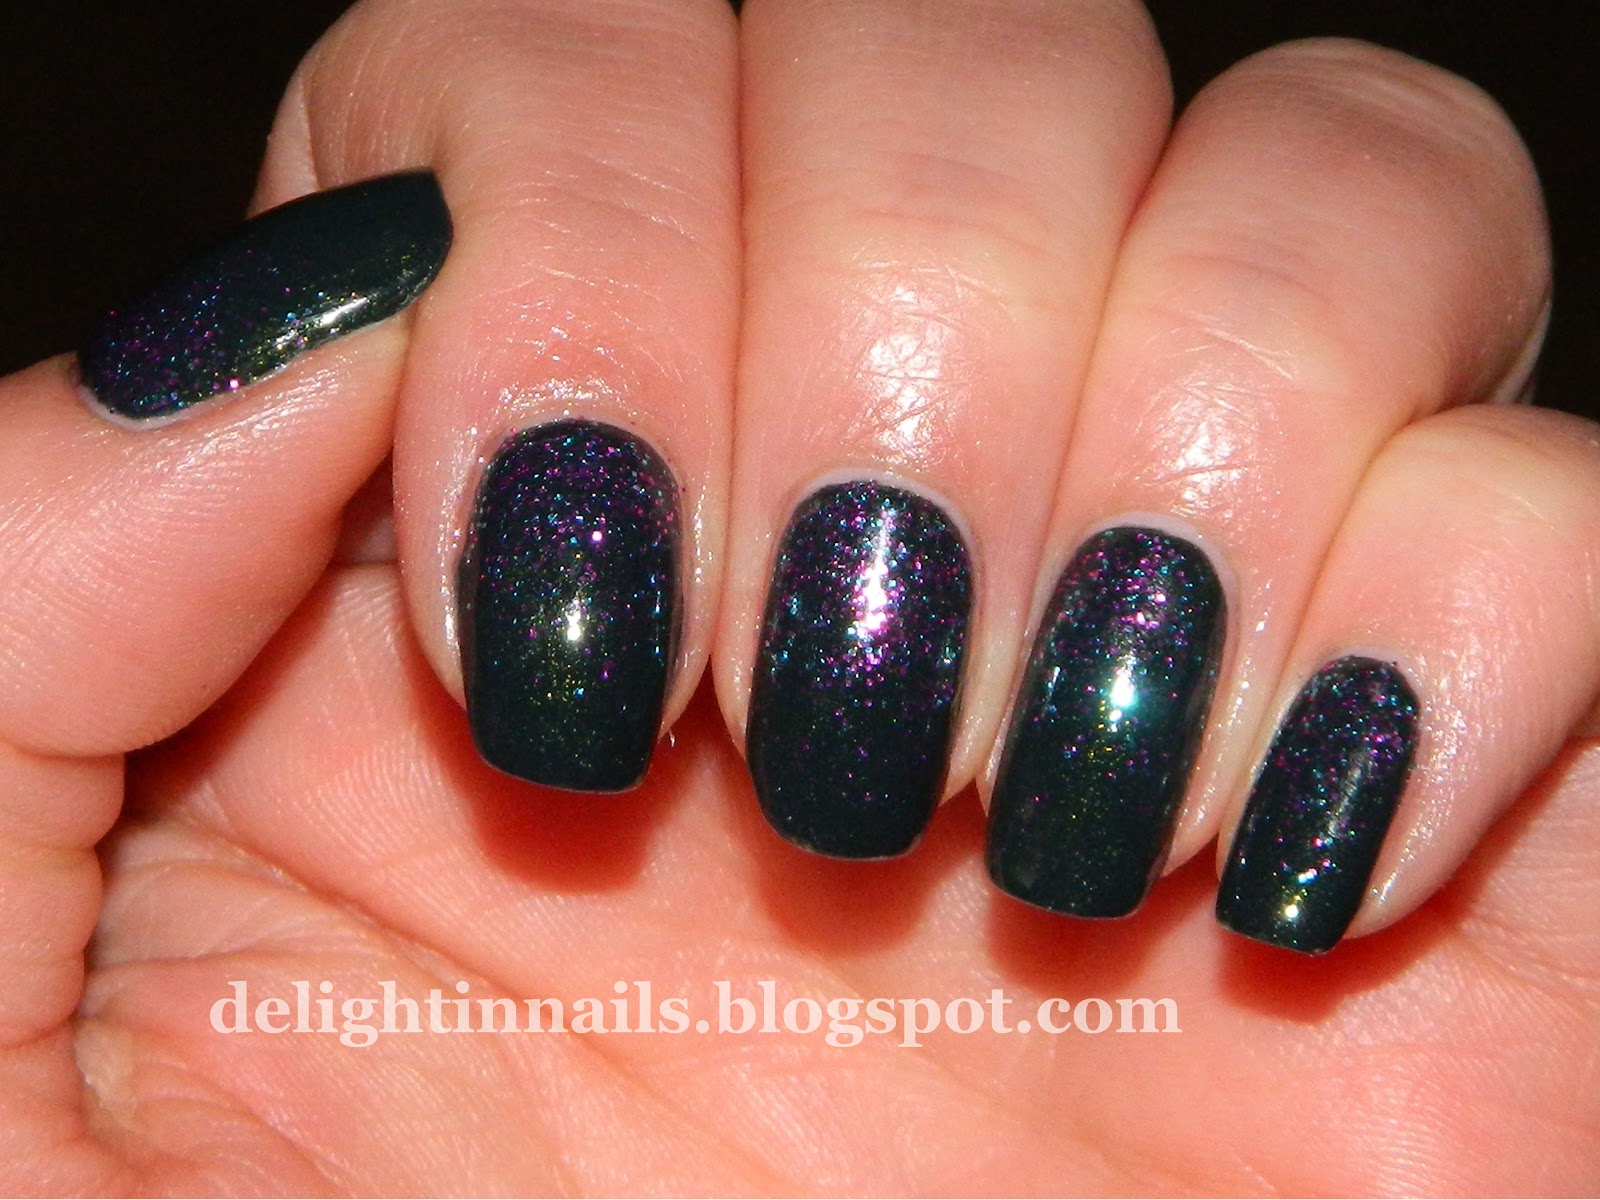 10. New Year's Resolution Nail Design - wide 8